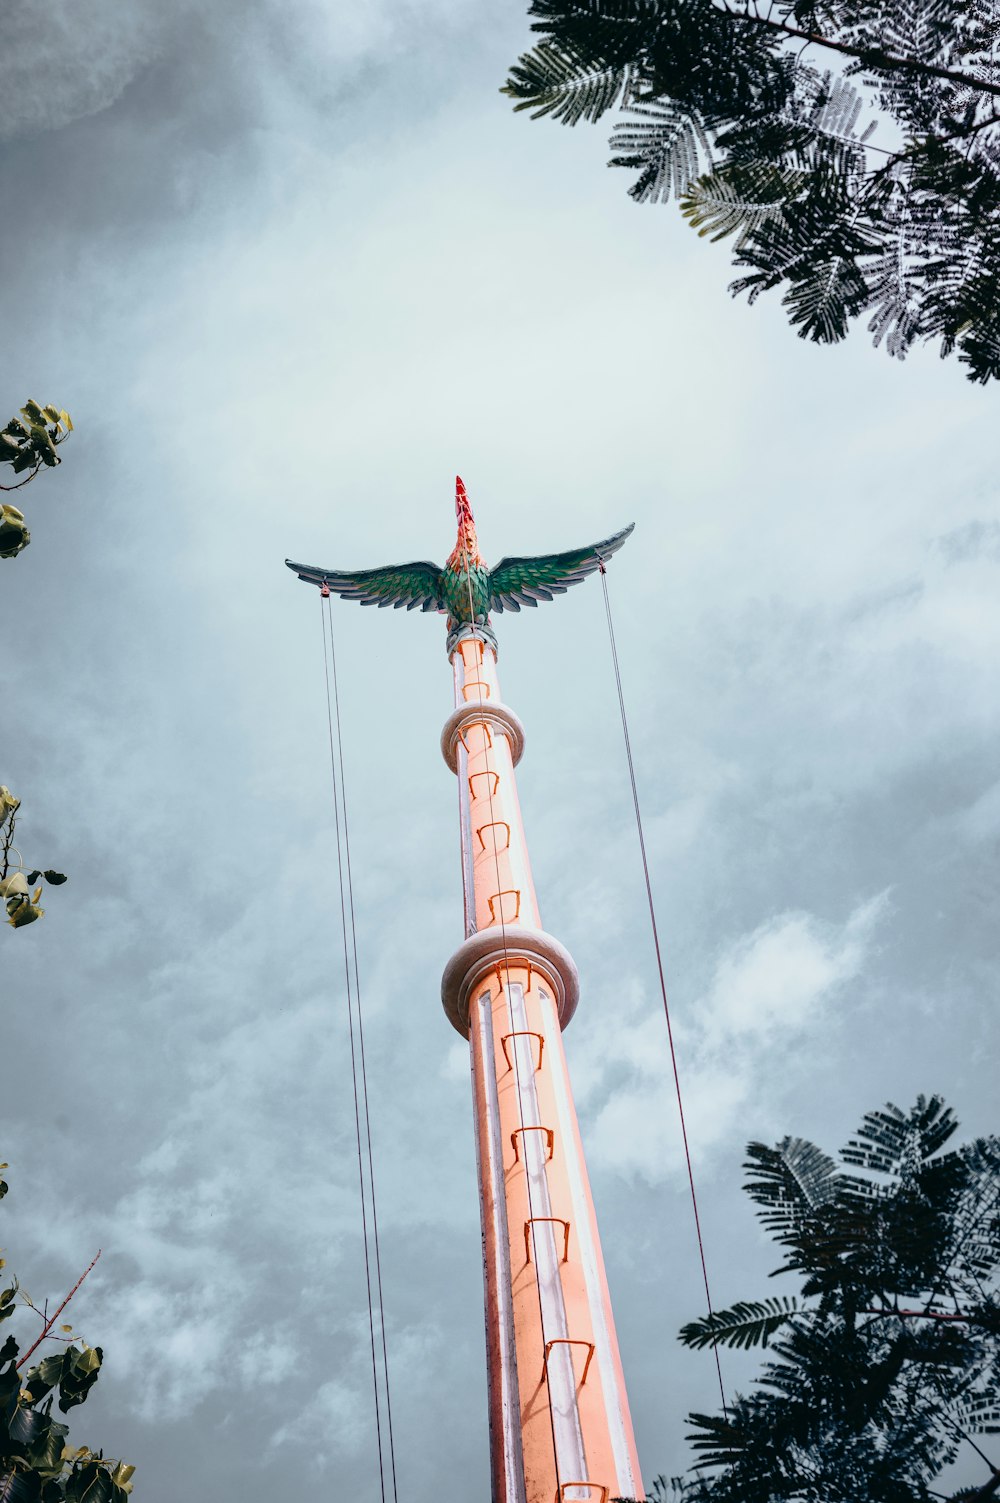 a tall tower with a bird on top of it